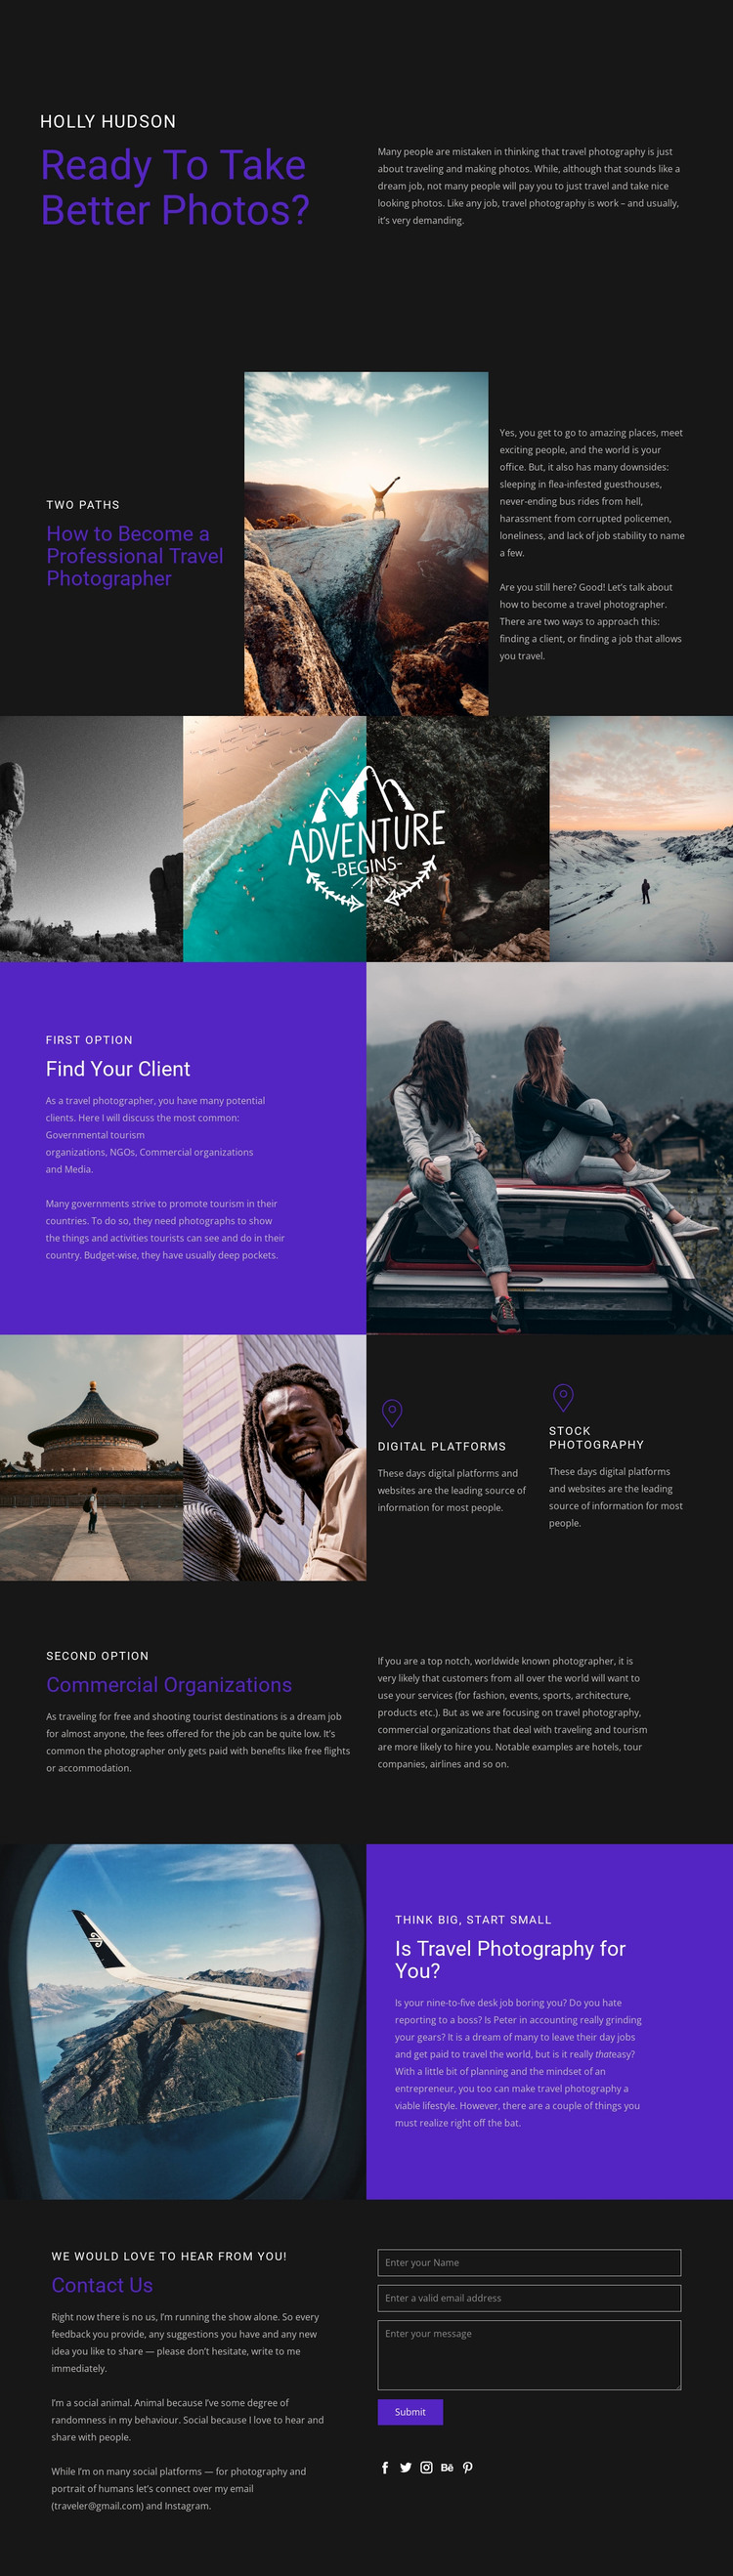 Travel and photography Web Design